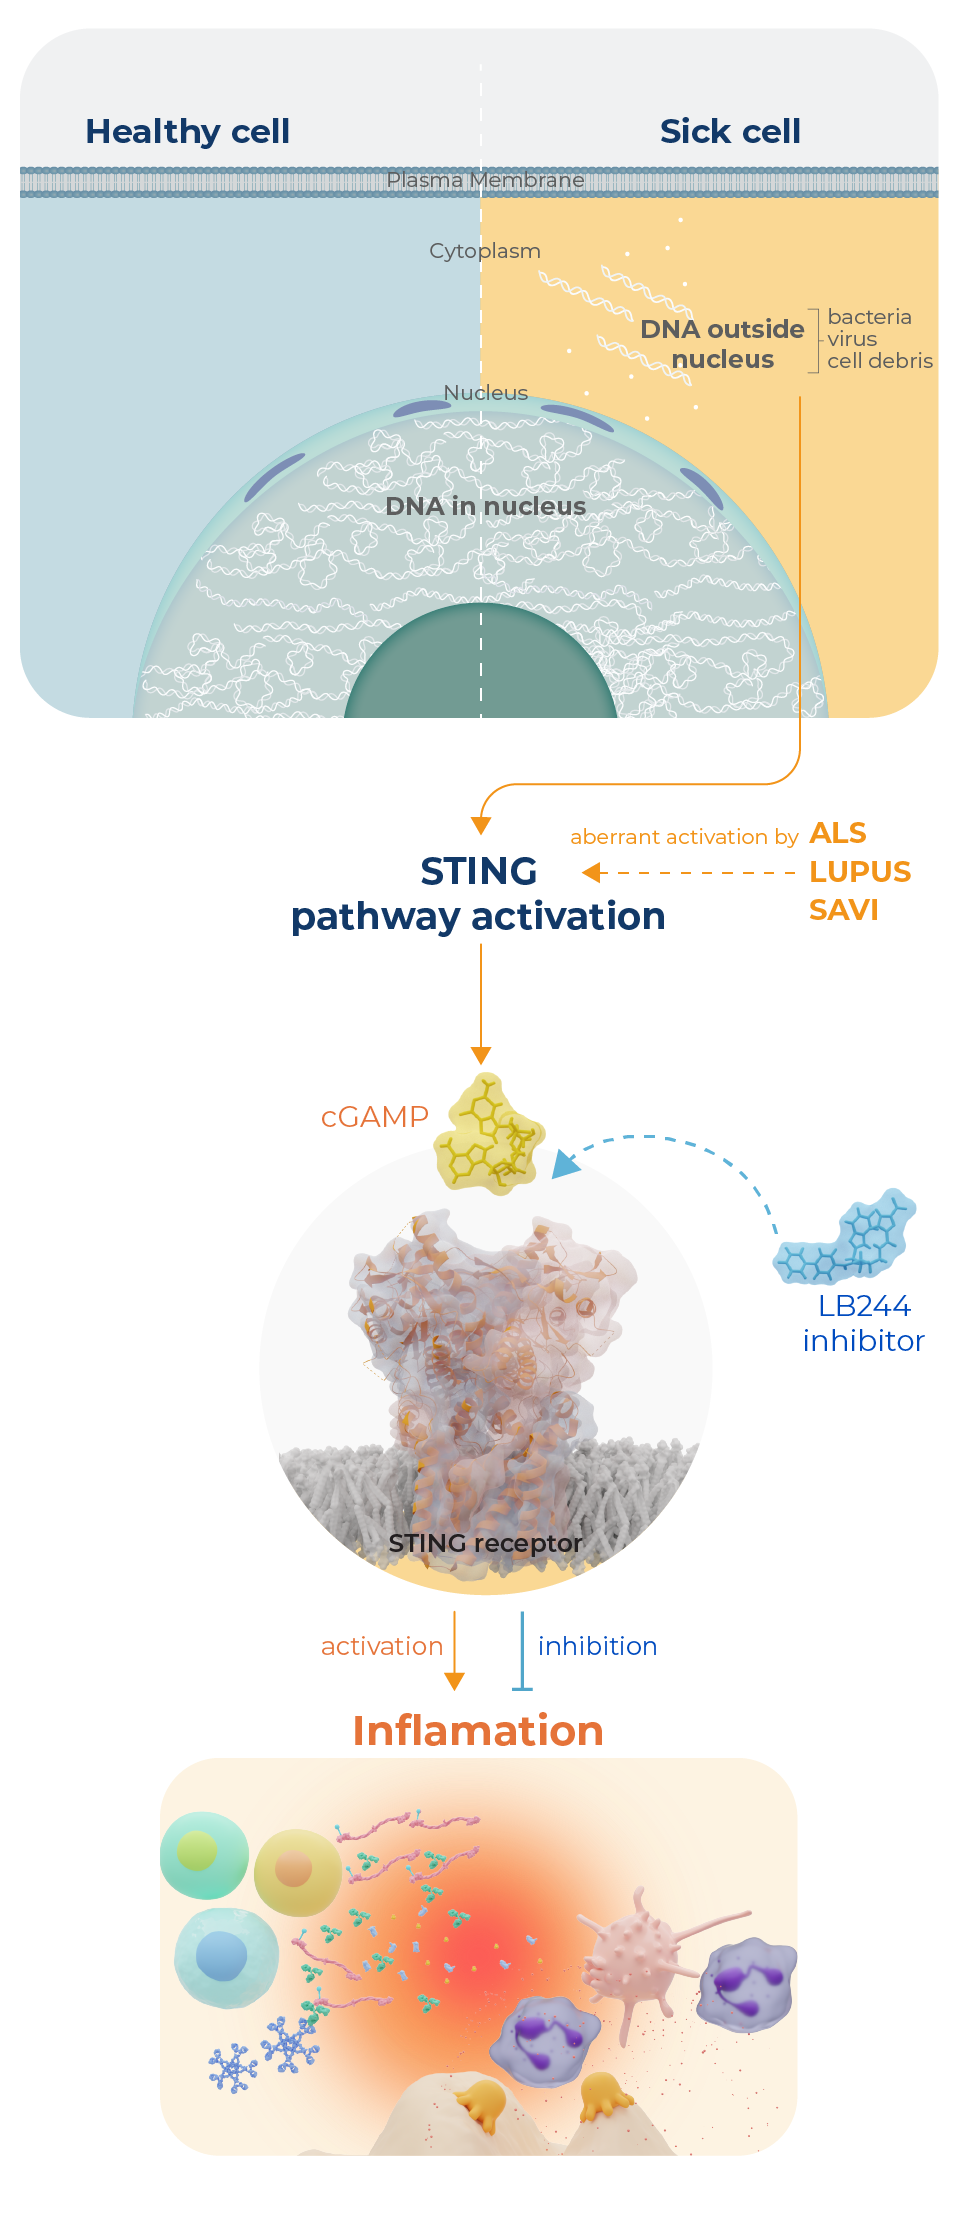 illustration contrasting unstimulated and STING activated cell signaling